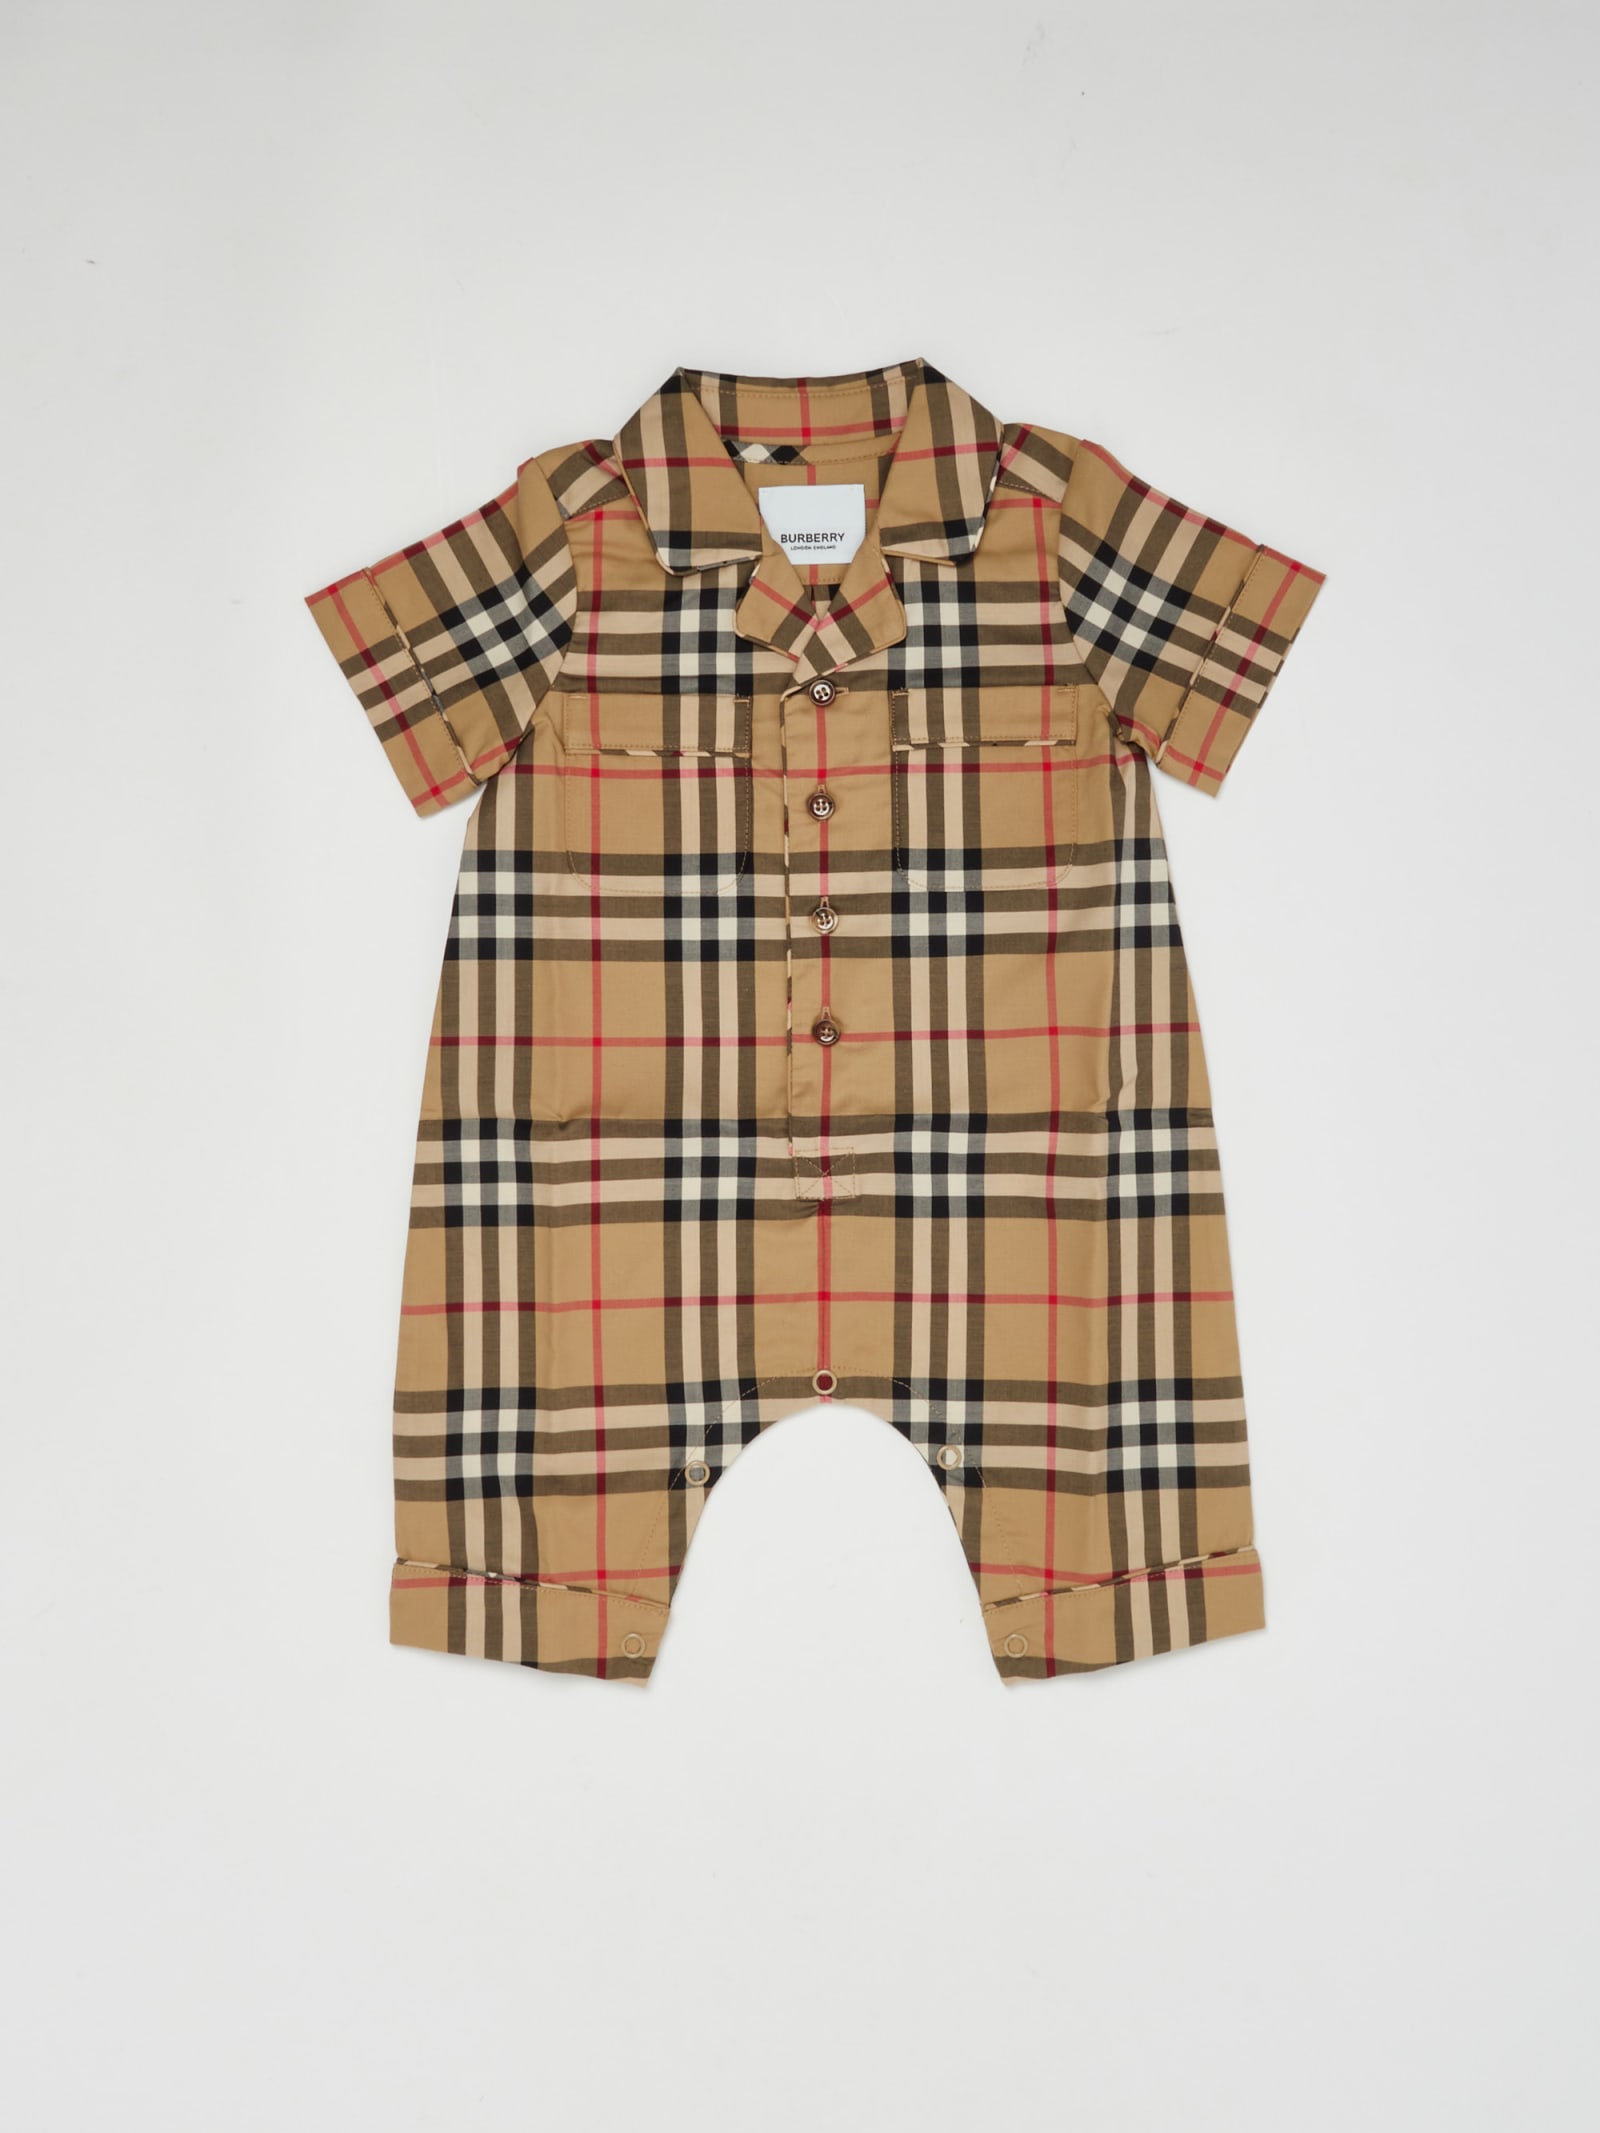 BURBERRY ANDREAS OVERALLS JUMP SUIT